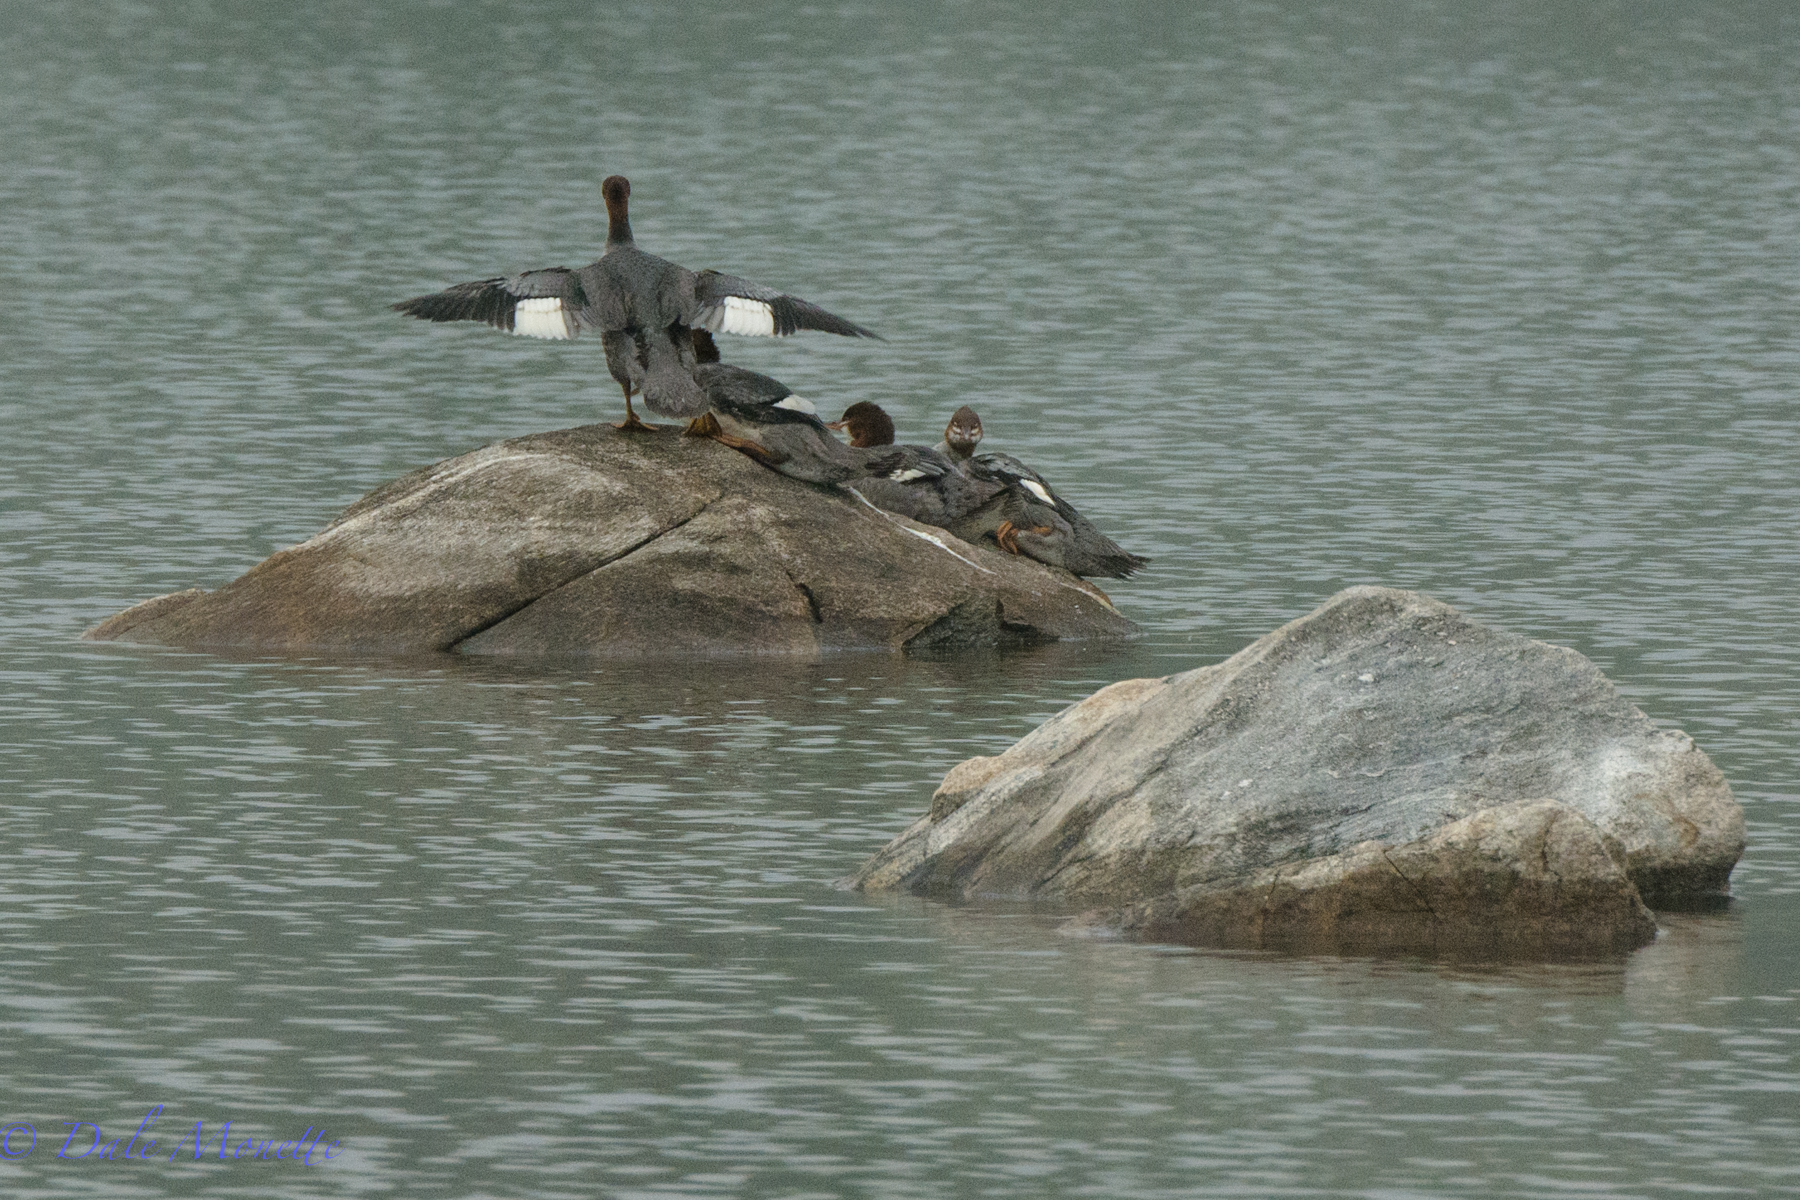   The same merganser chicks waiting for the sun to come out all crowd onto rock to preen and complain about Red Sox loosing season. &nbsp; 8/17/15  